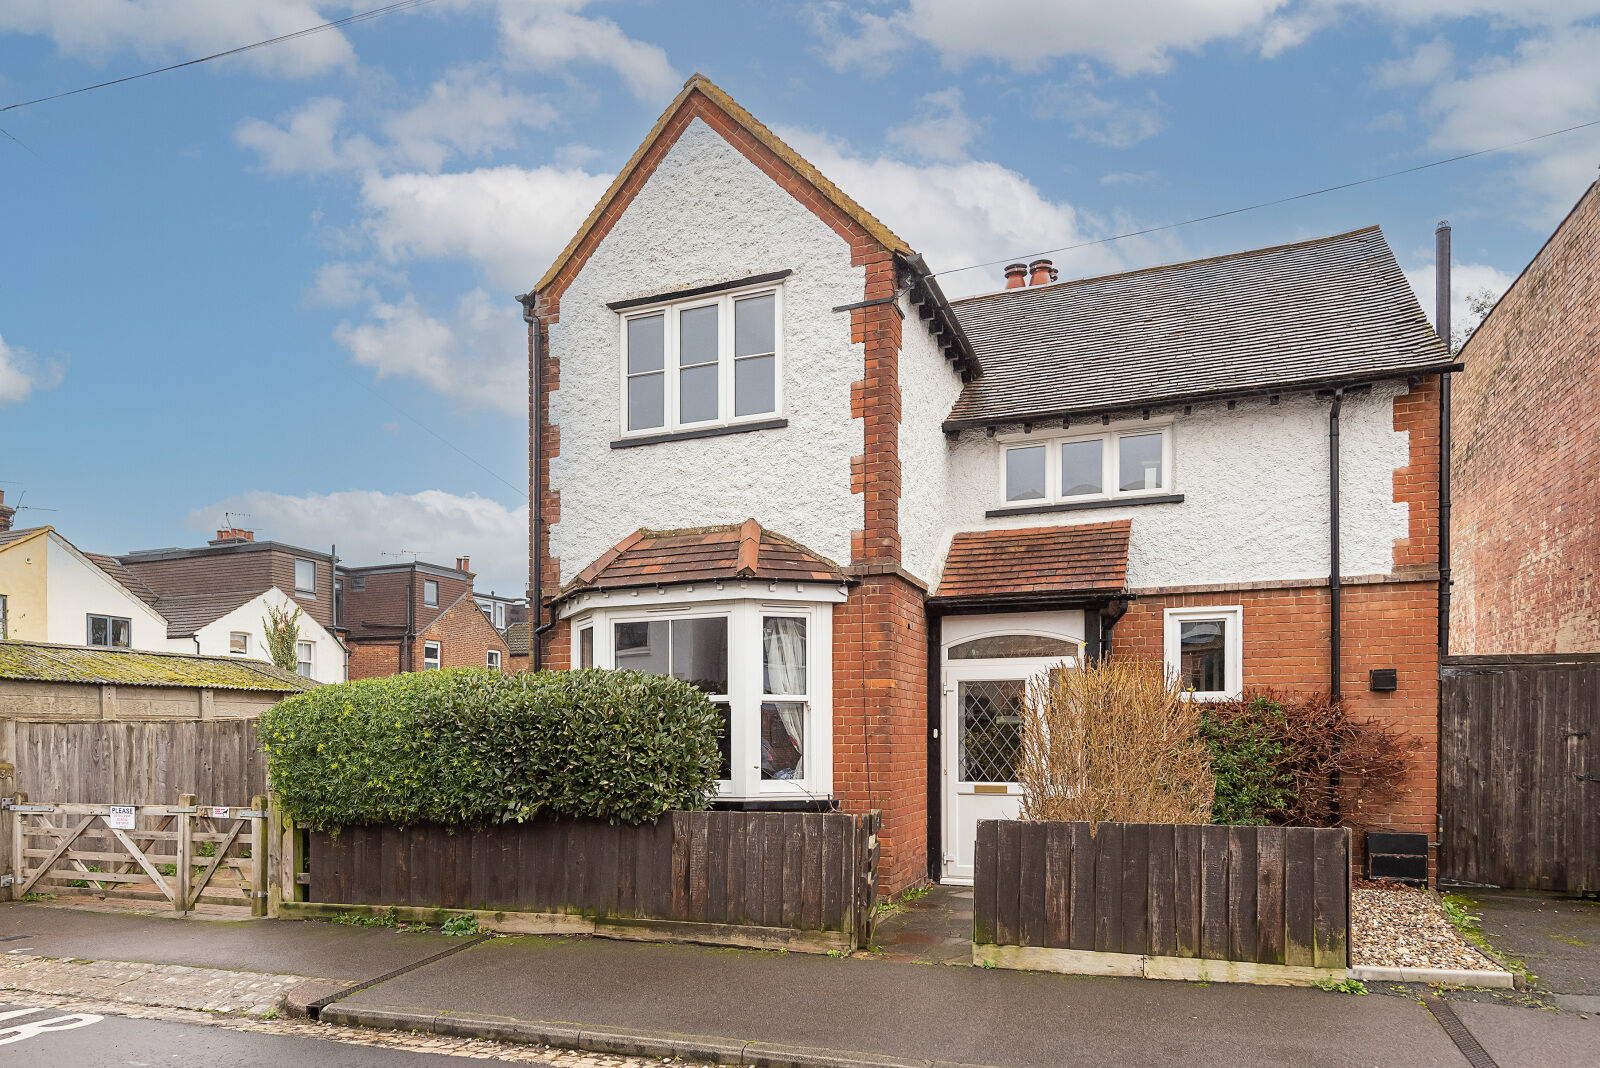 3 bedroom detached house to rent, Available now College Road, St. Albans, AL1, main image